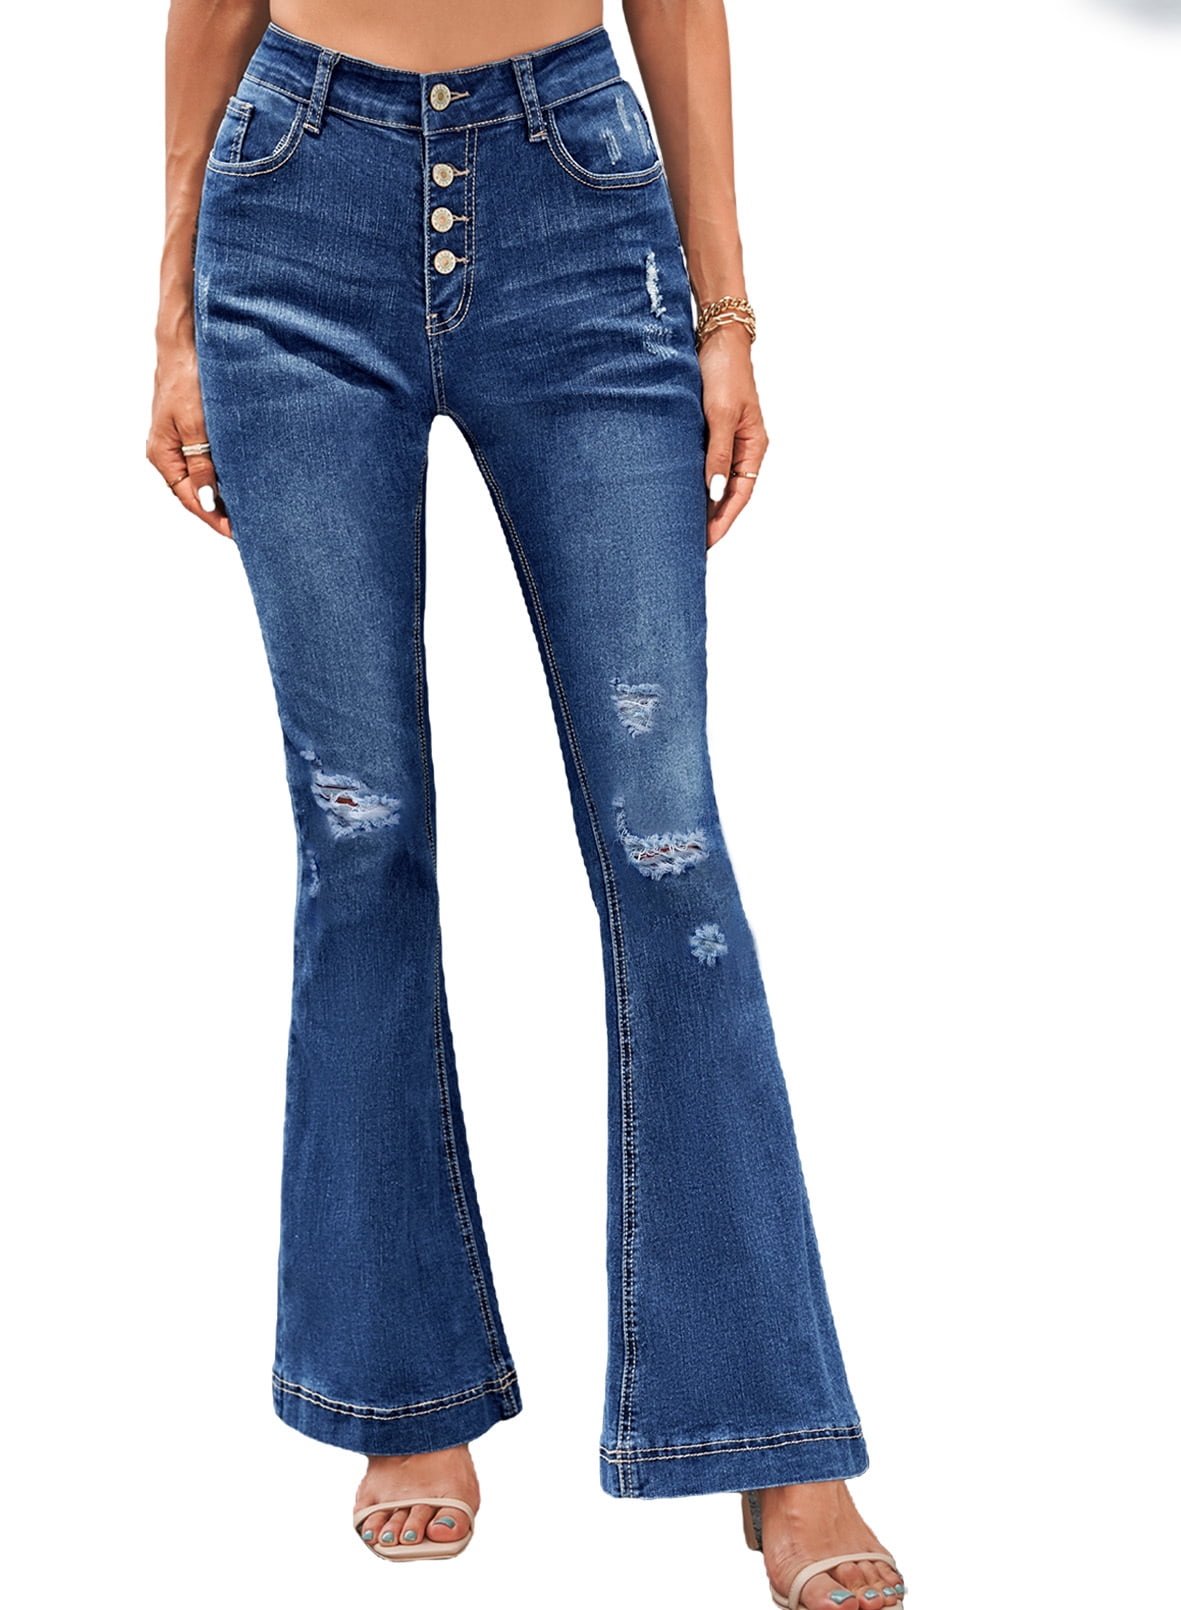 Eytino Women Flare Jeans Ripped Bell Bottom Jeans Mid Rise Fitted Denim ...